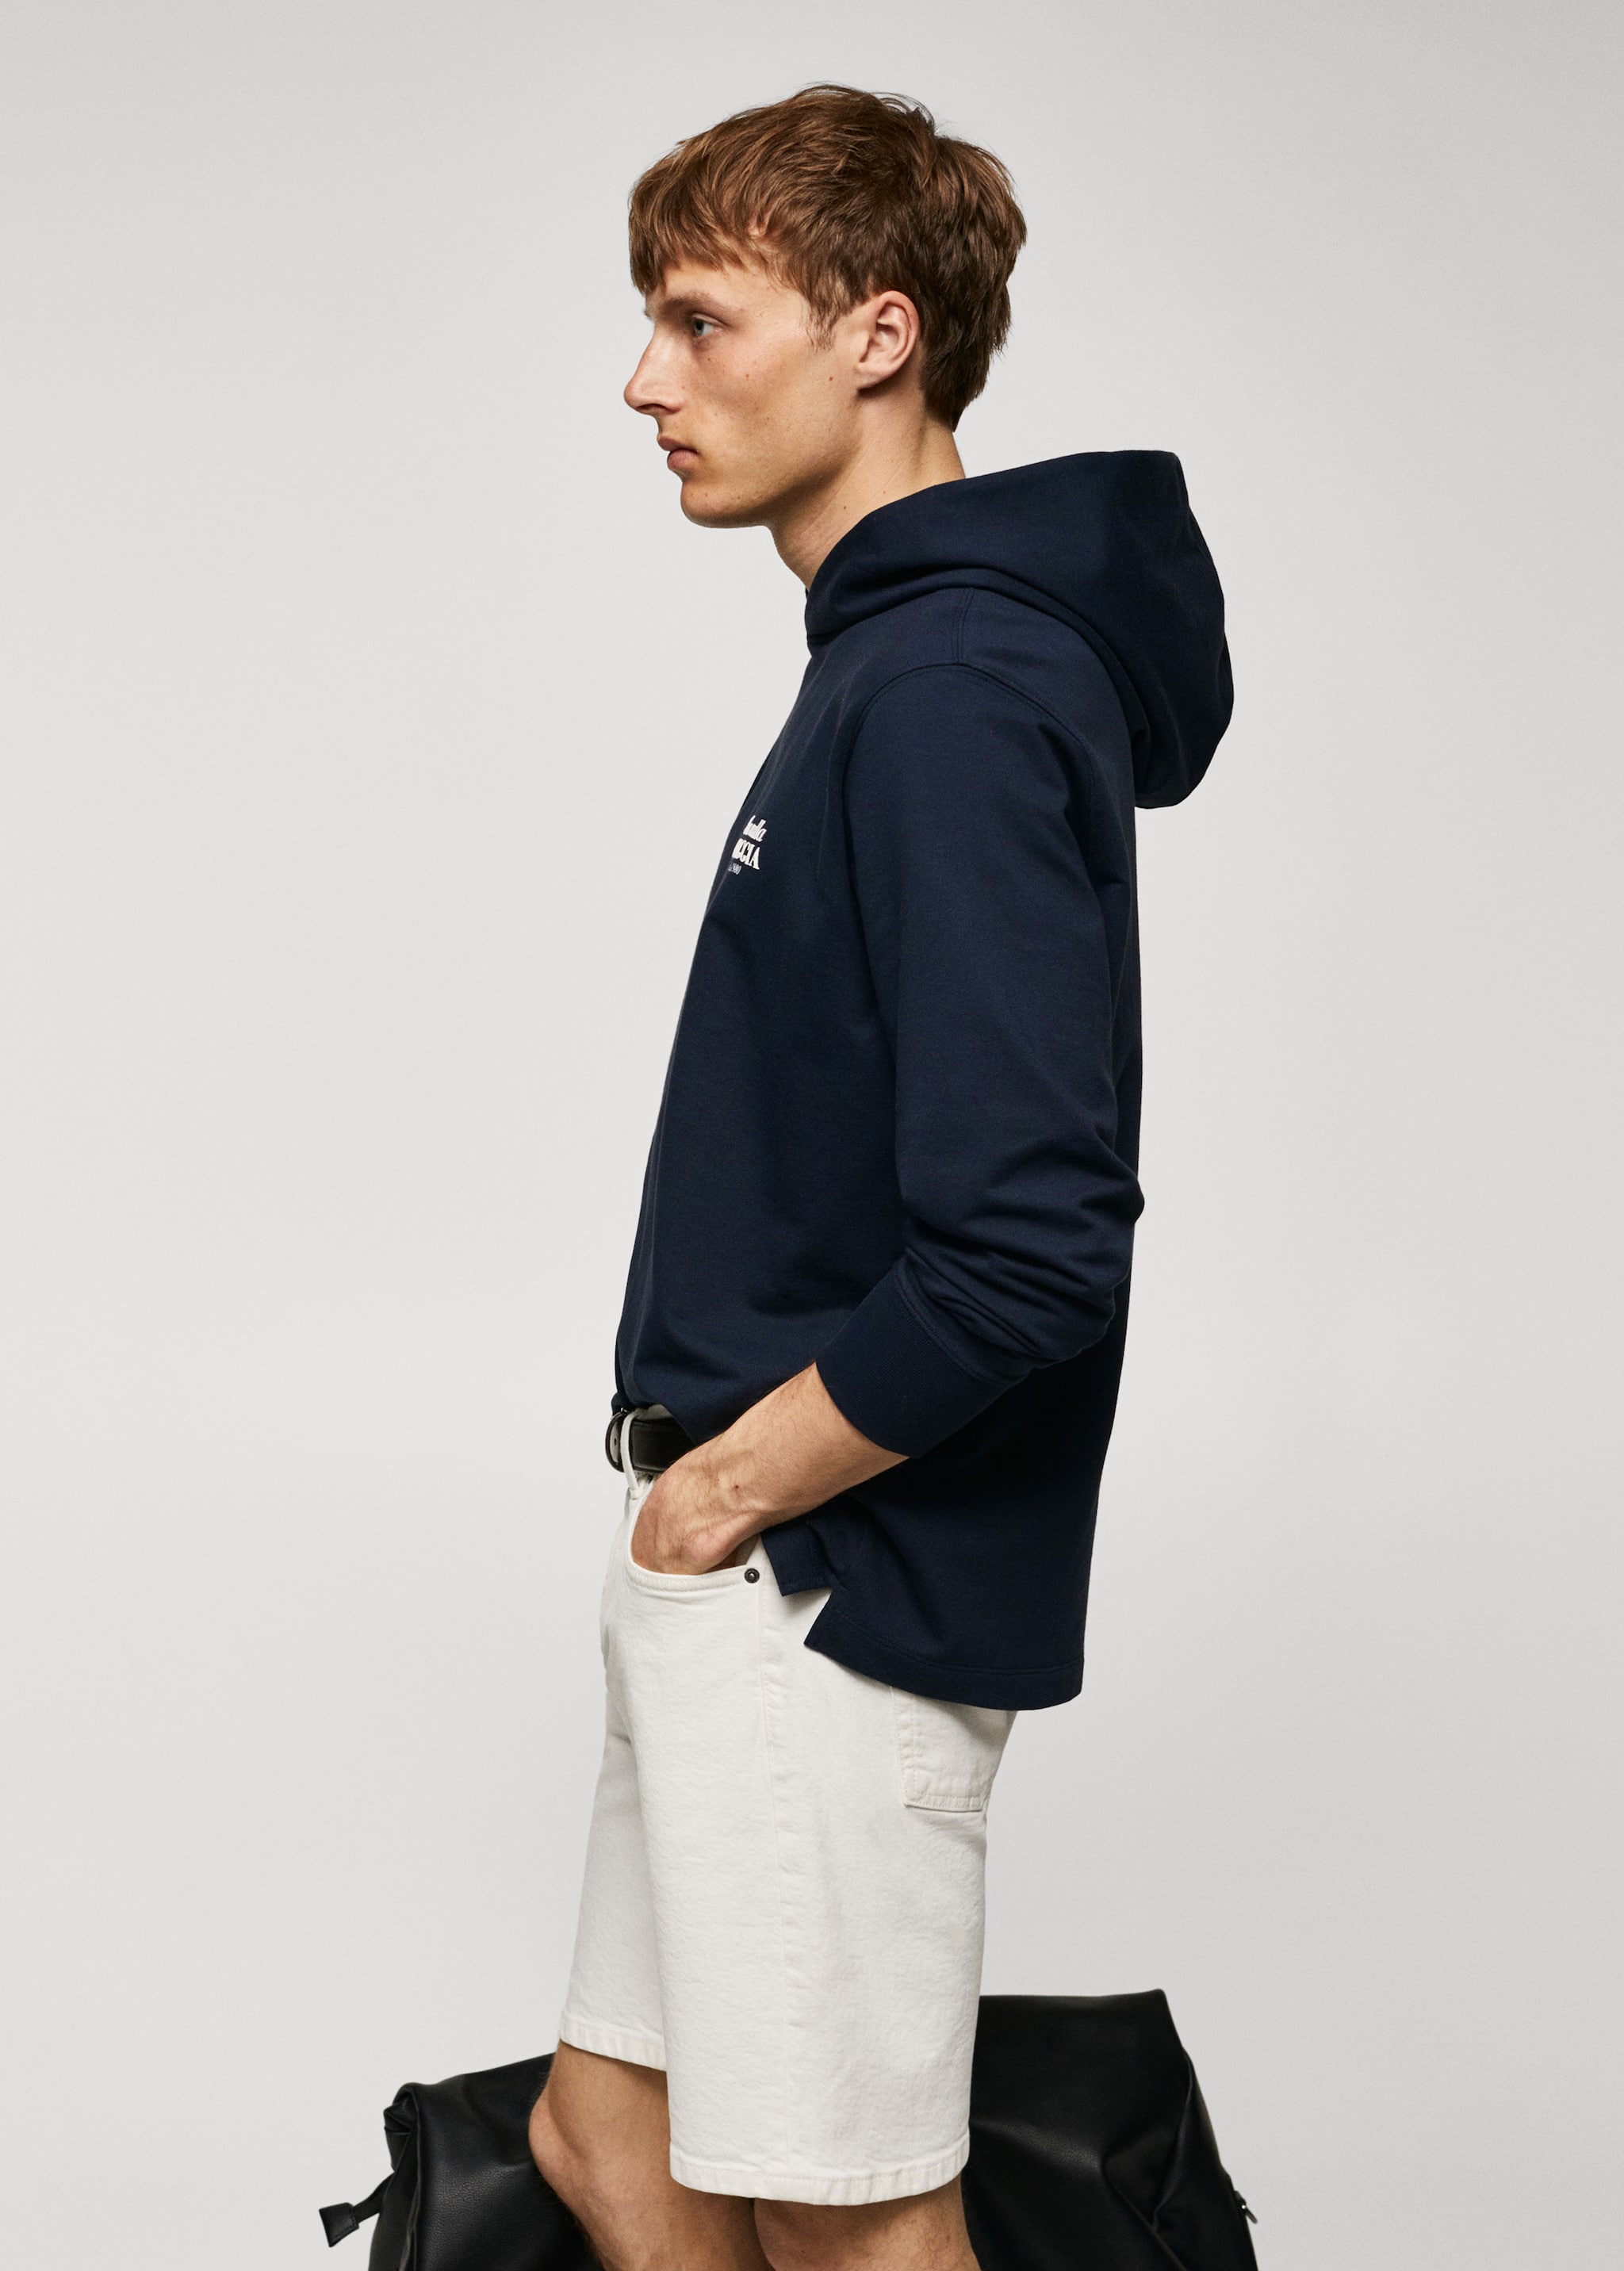 Hooded sweatshirt with text - Details of the article 2